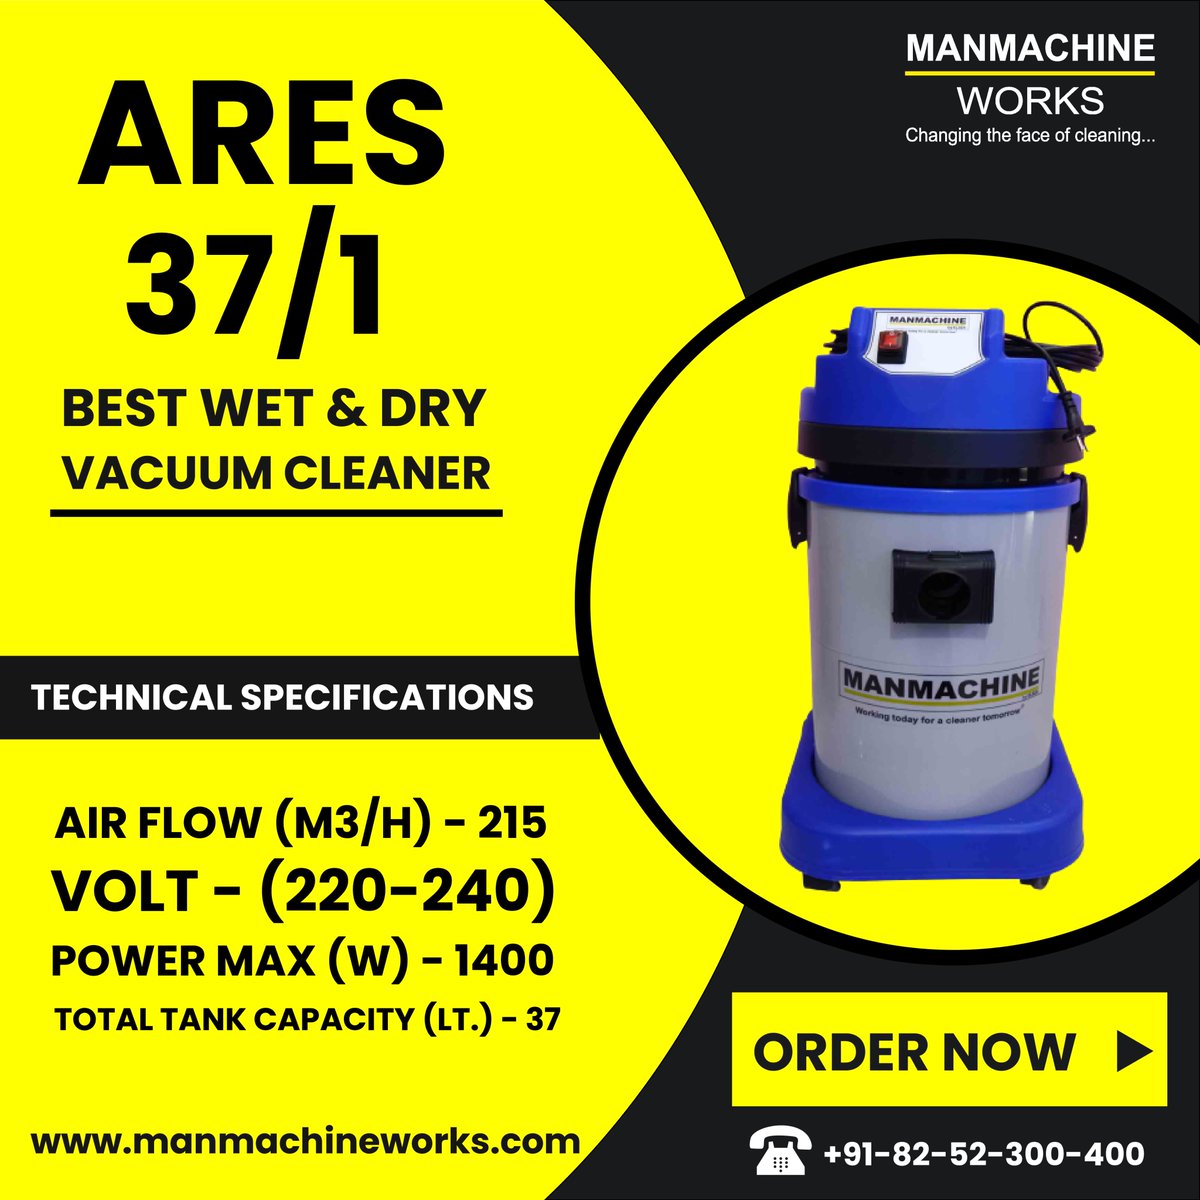 ARES 37/1 (Best Wet and Dry Vacuum Cleaner)

🔥 Order it Now!!
Call 📲: +91-82-52-300-400

💻 Visit: manmachineworks.com/wet-and-dry-va…
=========================
#carvaccum #carcleaning #carinterior #carinteriorcleaning #vaccumingcar #carcleaningmachines #carwash #manmachineworks